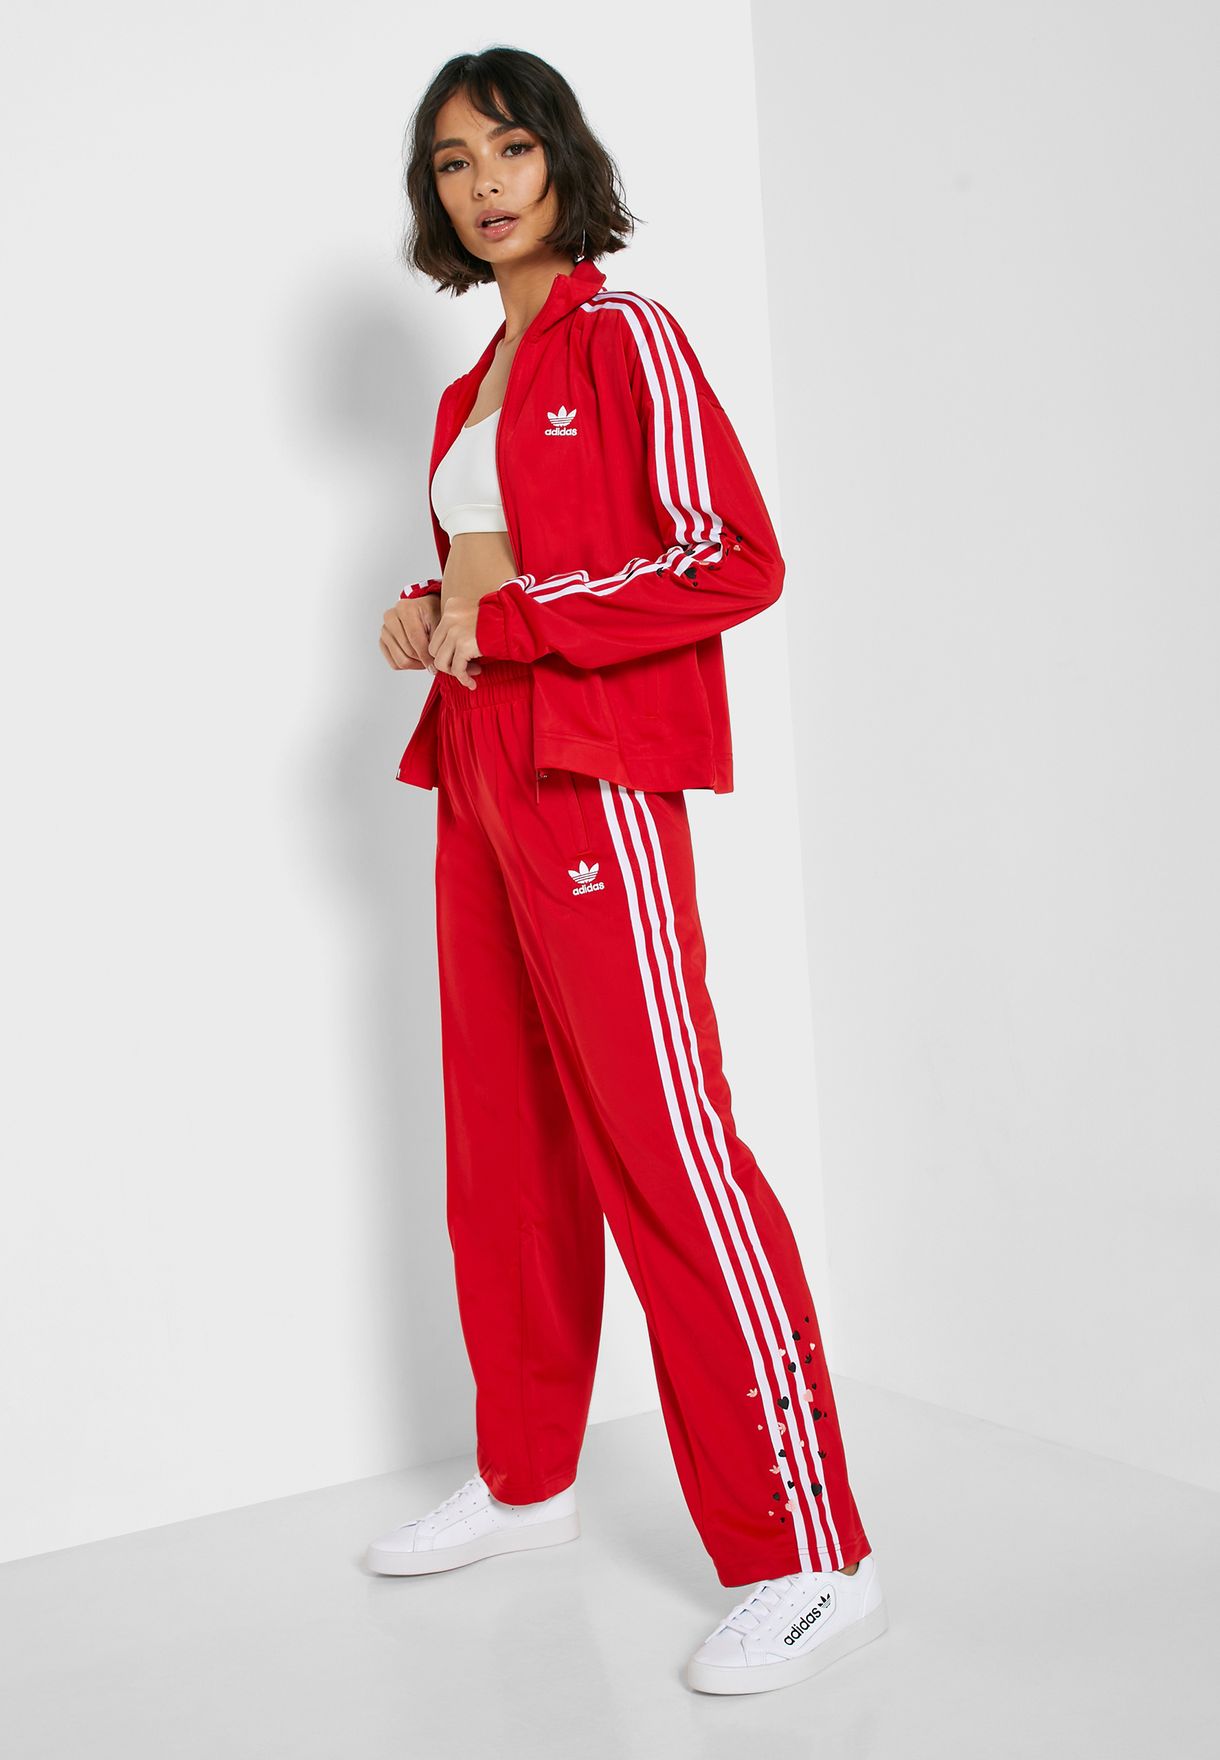 adidas red track pant